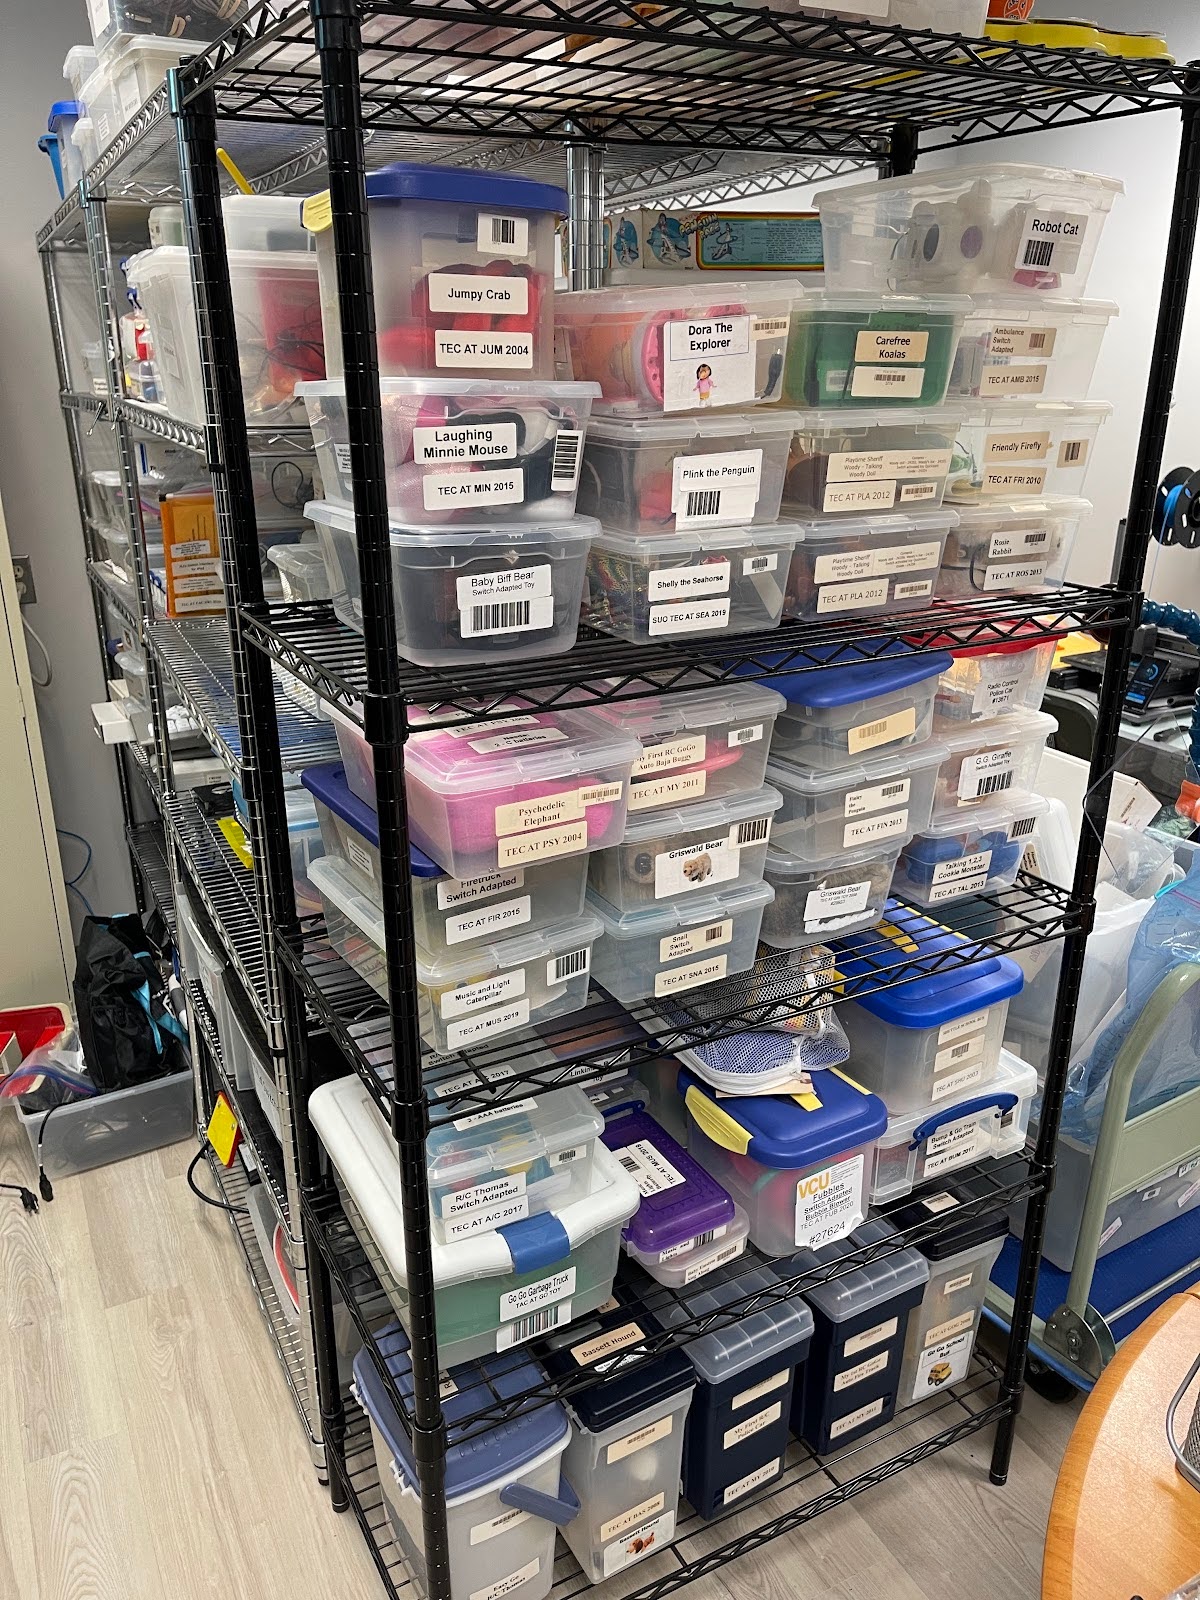 image of shelves of assisstive technology